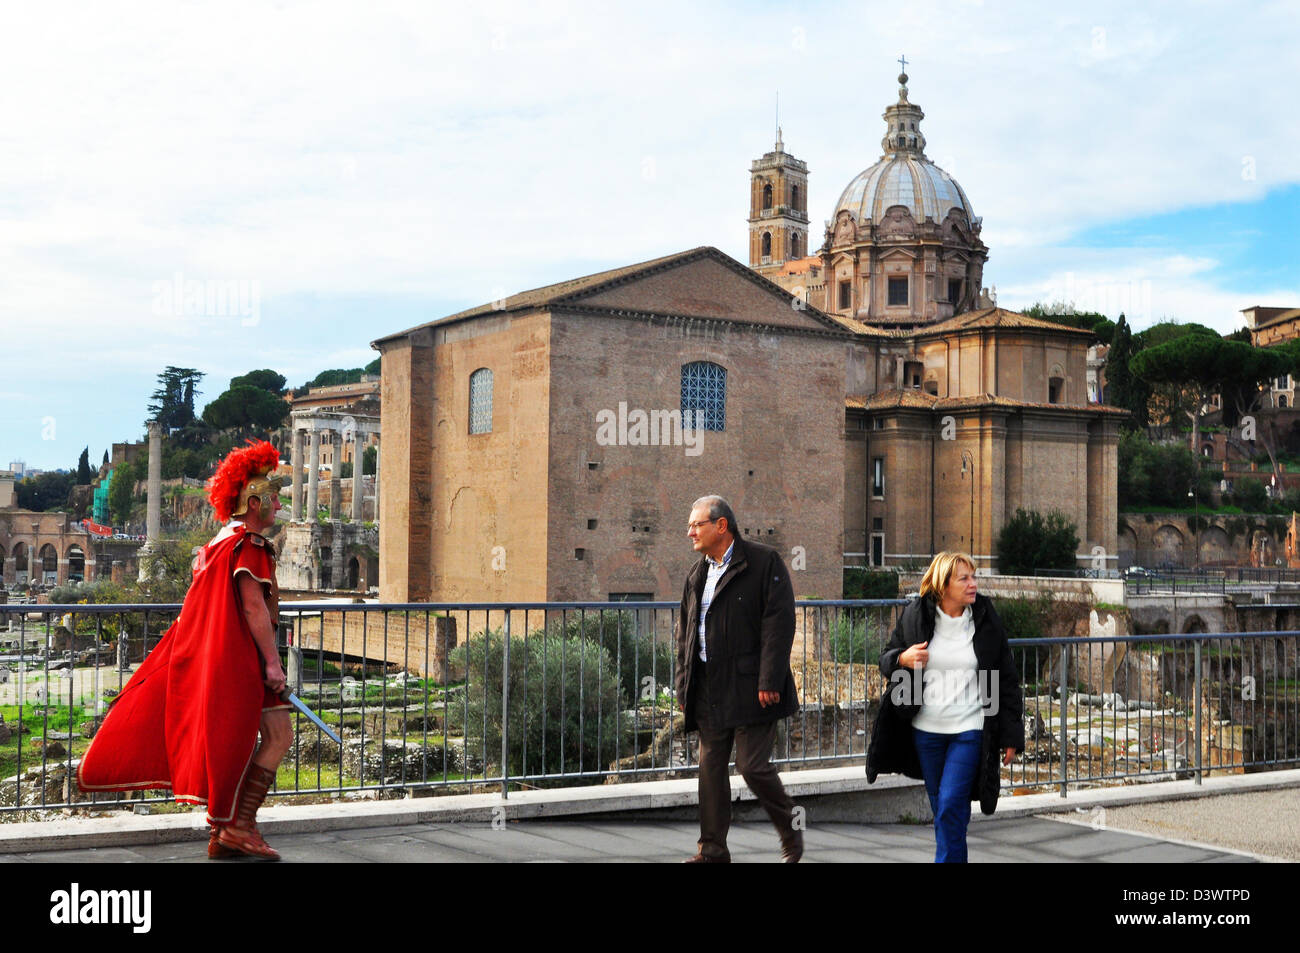 A Roman Soldier tries to attract attention from tourists on the Via del Fori Imperiall Road, Rome, Italy Stock Photo